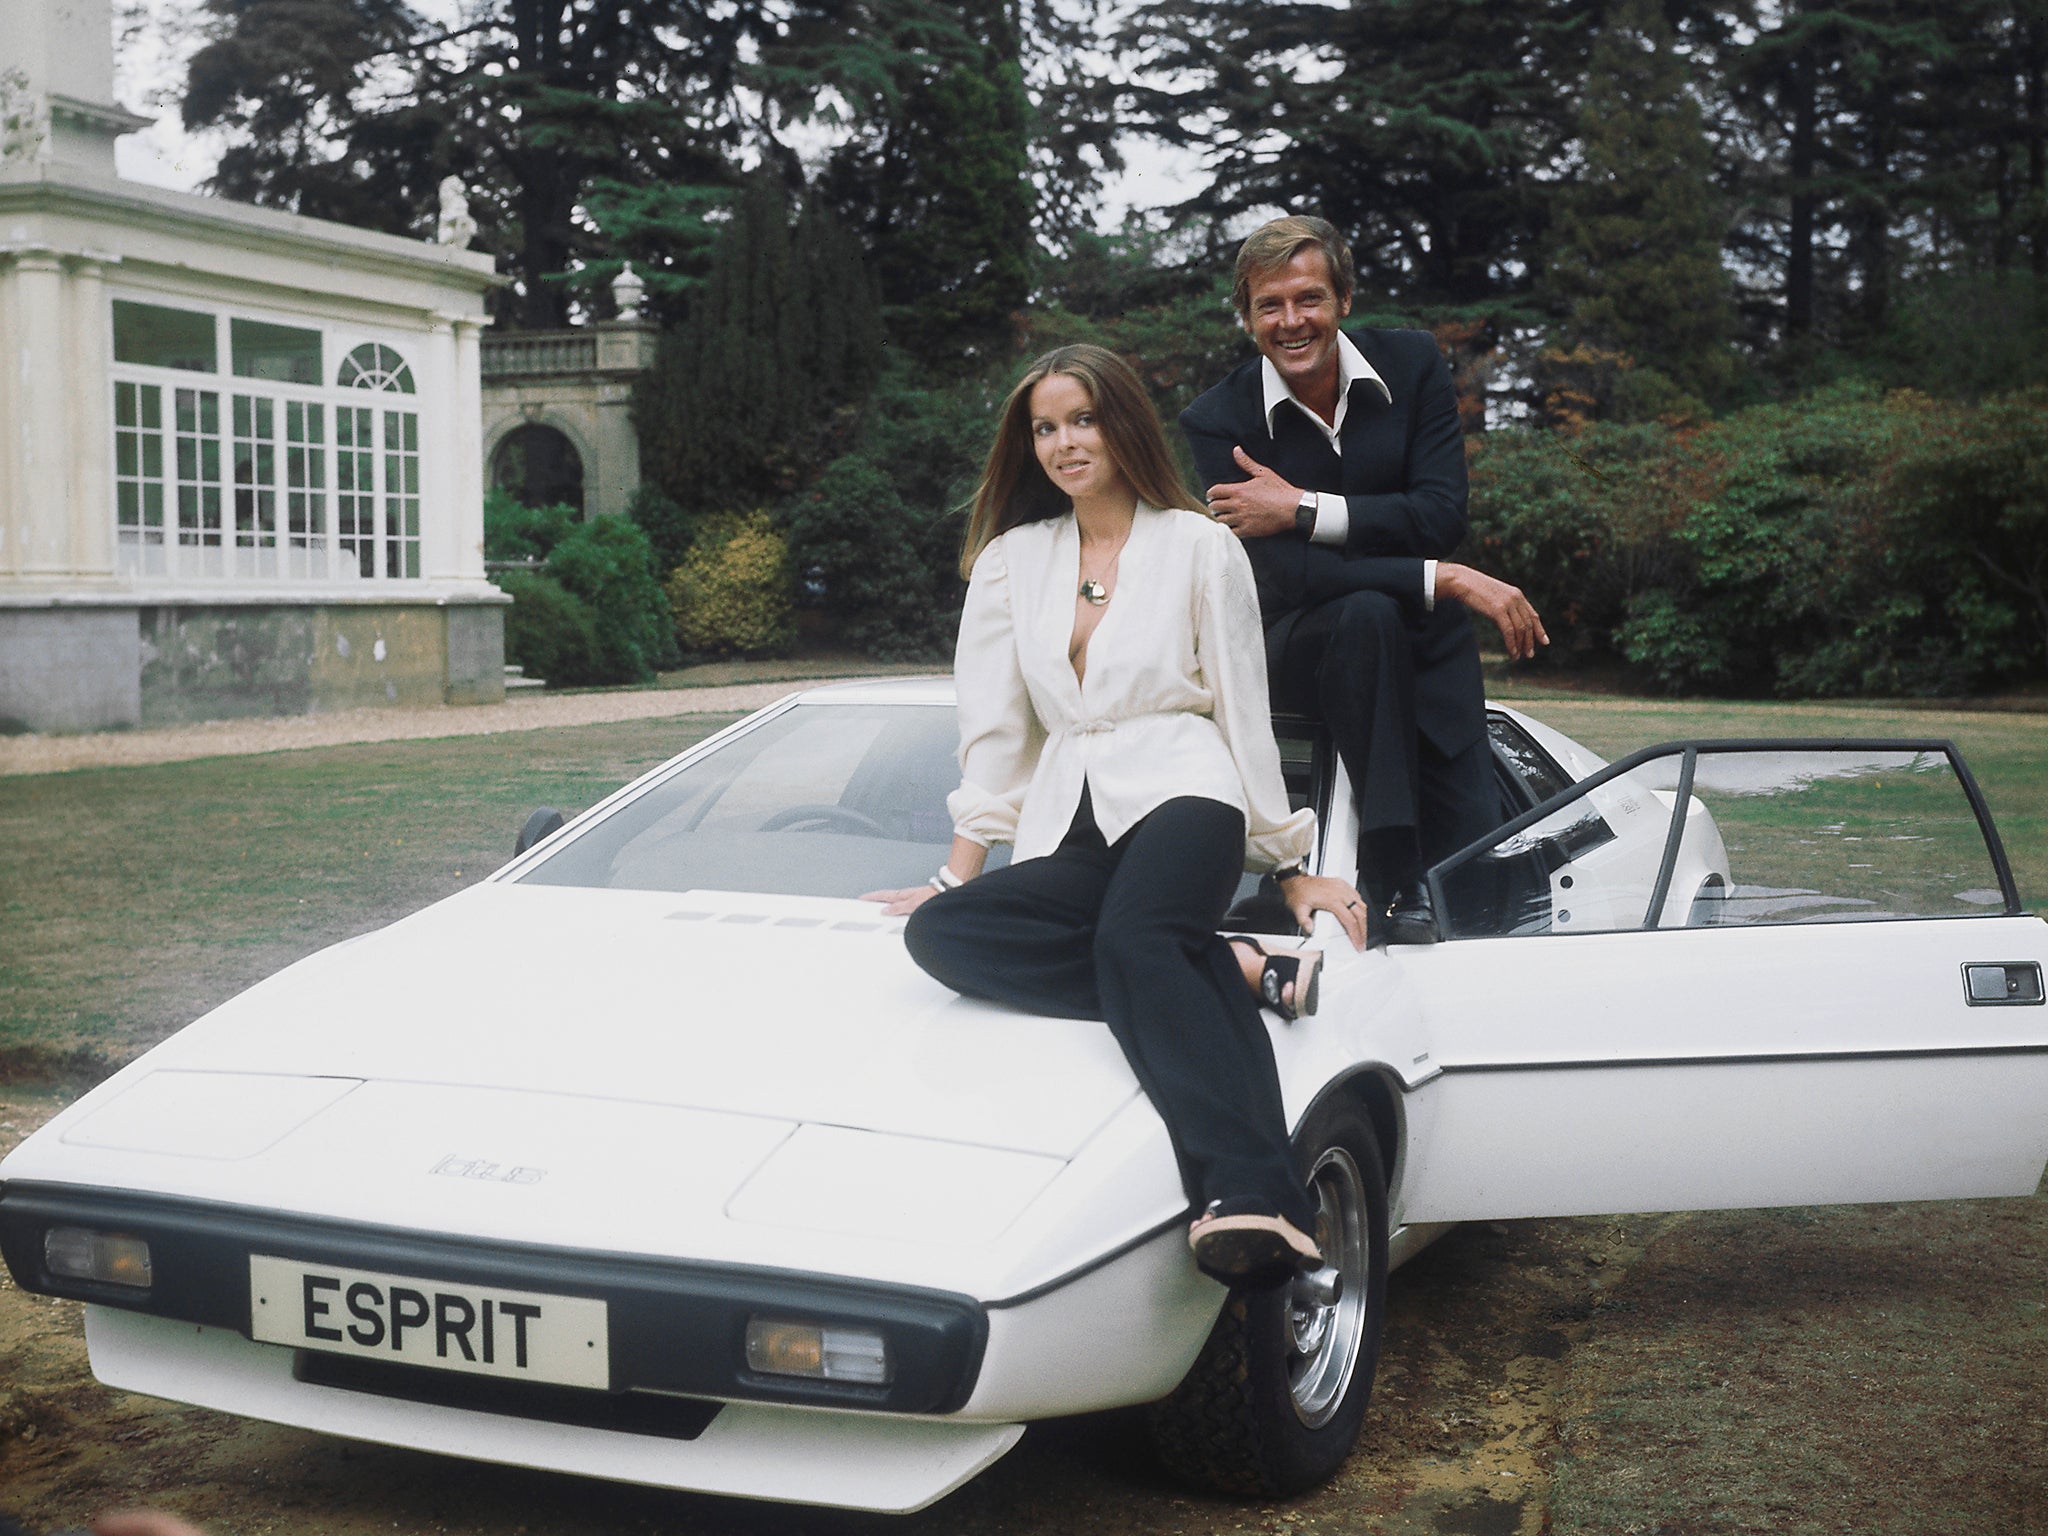 Lotus exploited on-screen branding in the James Bond film ‘The Spy Who Loved Me’ in the 1970s, but went on to fail financially